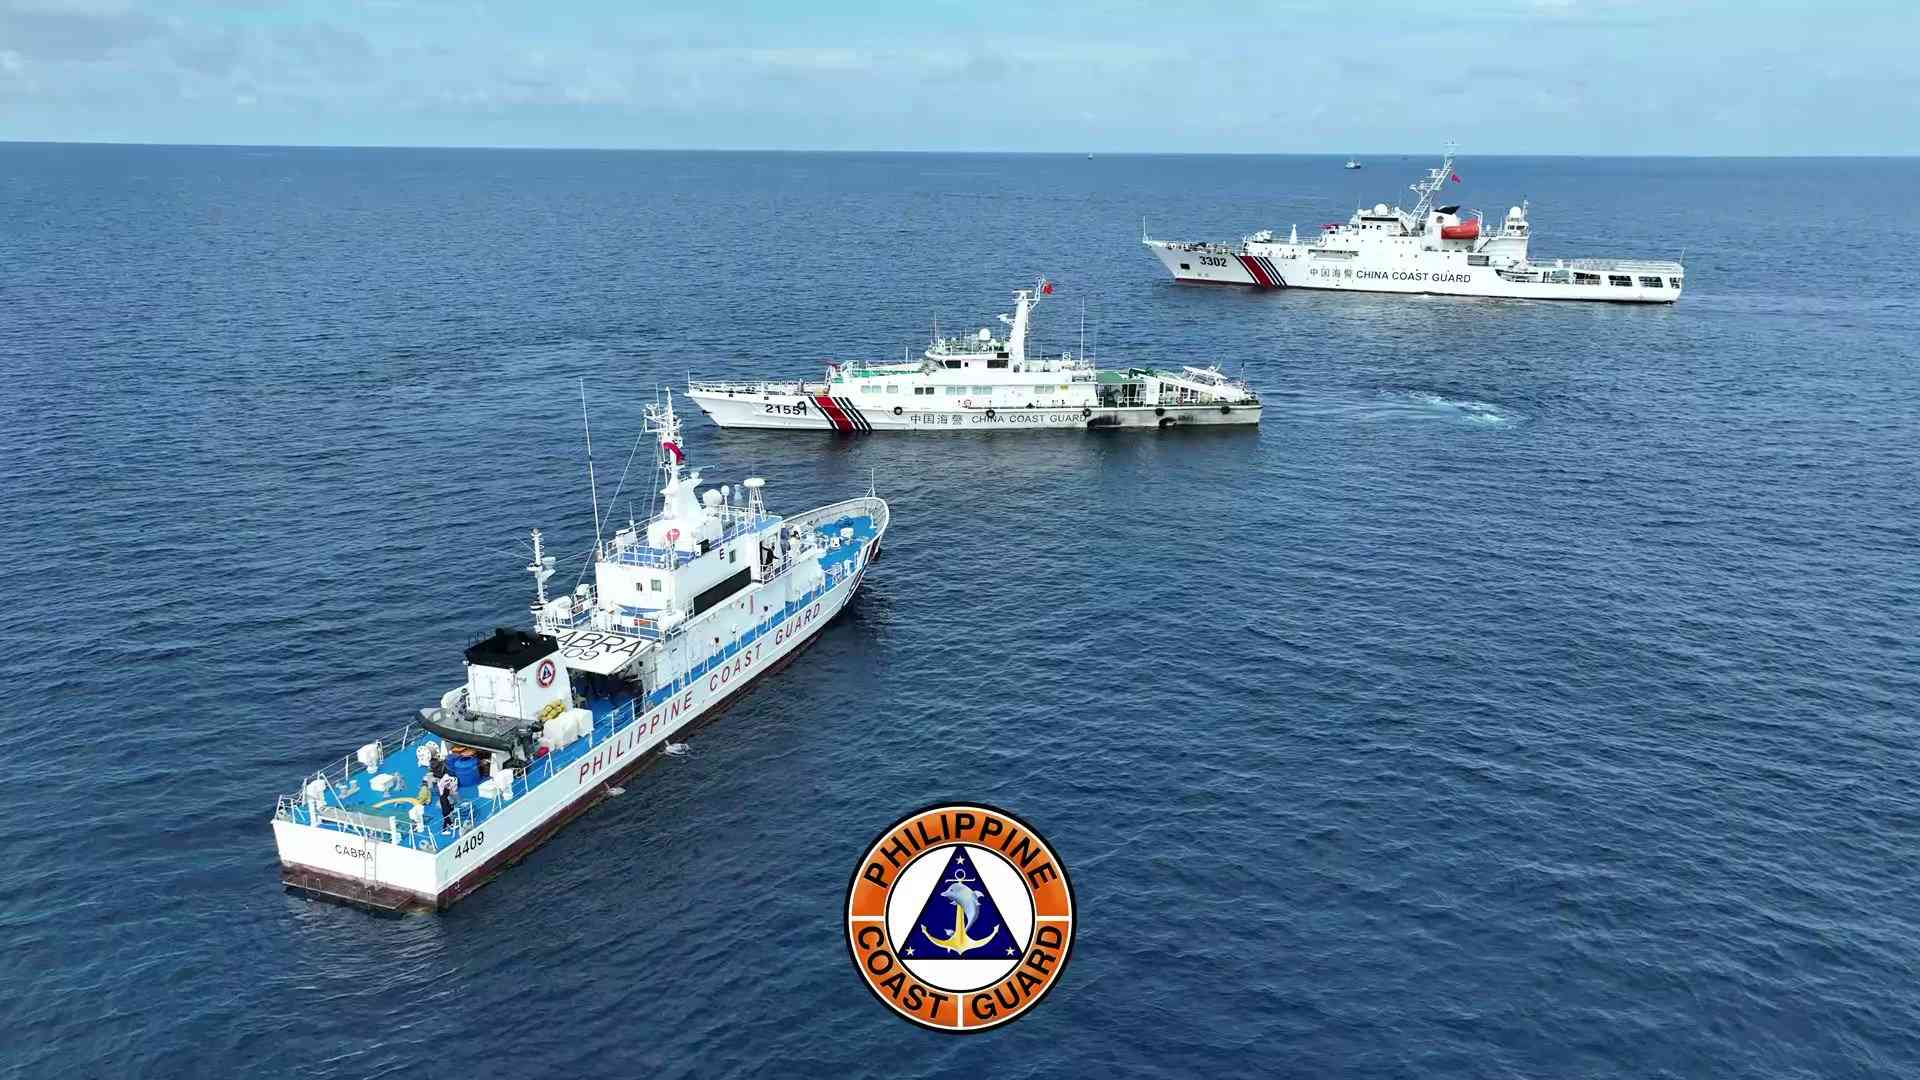 RORE mission to BRP Sierra Madre in Ayungin Shoal “without untoward incidents”- DFA